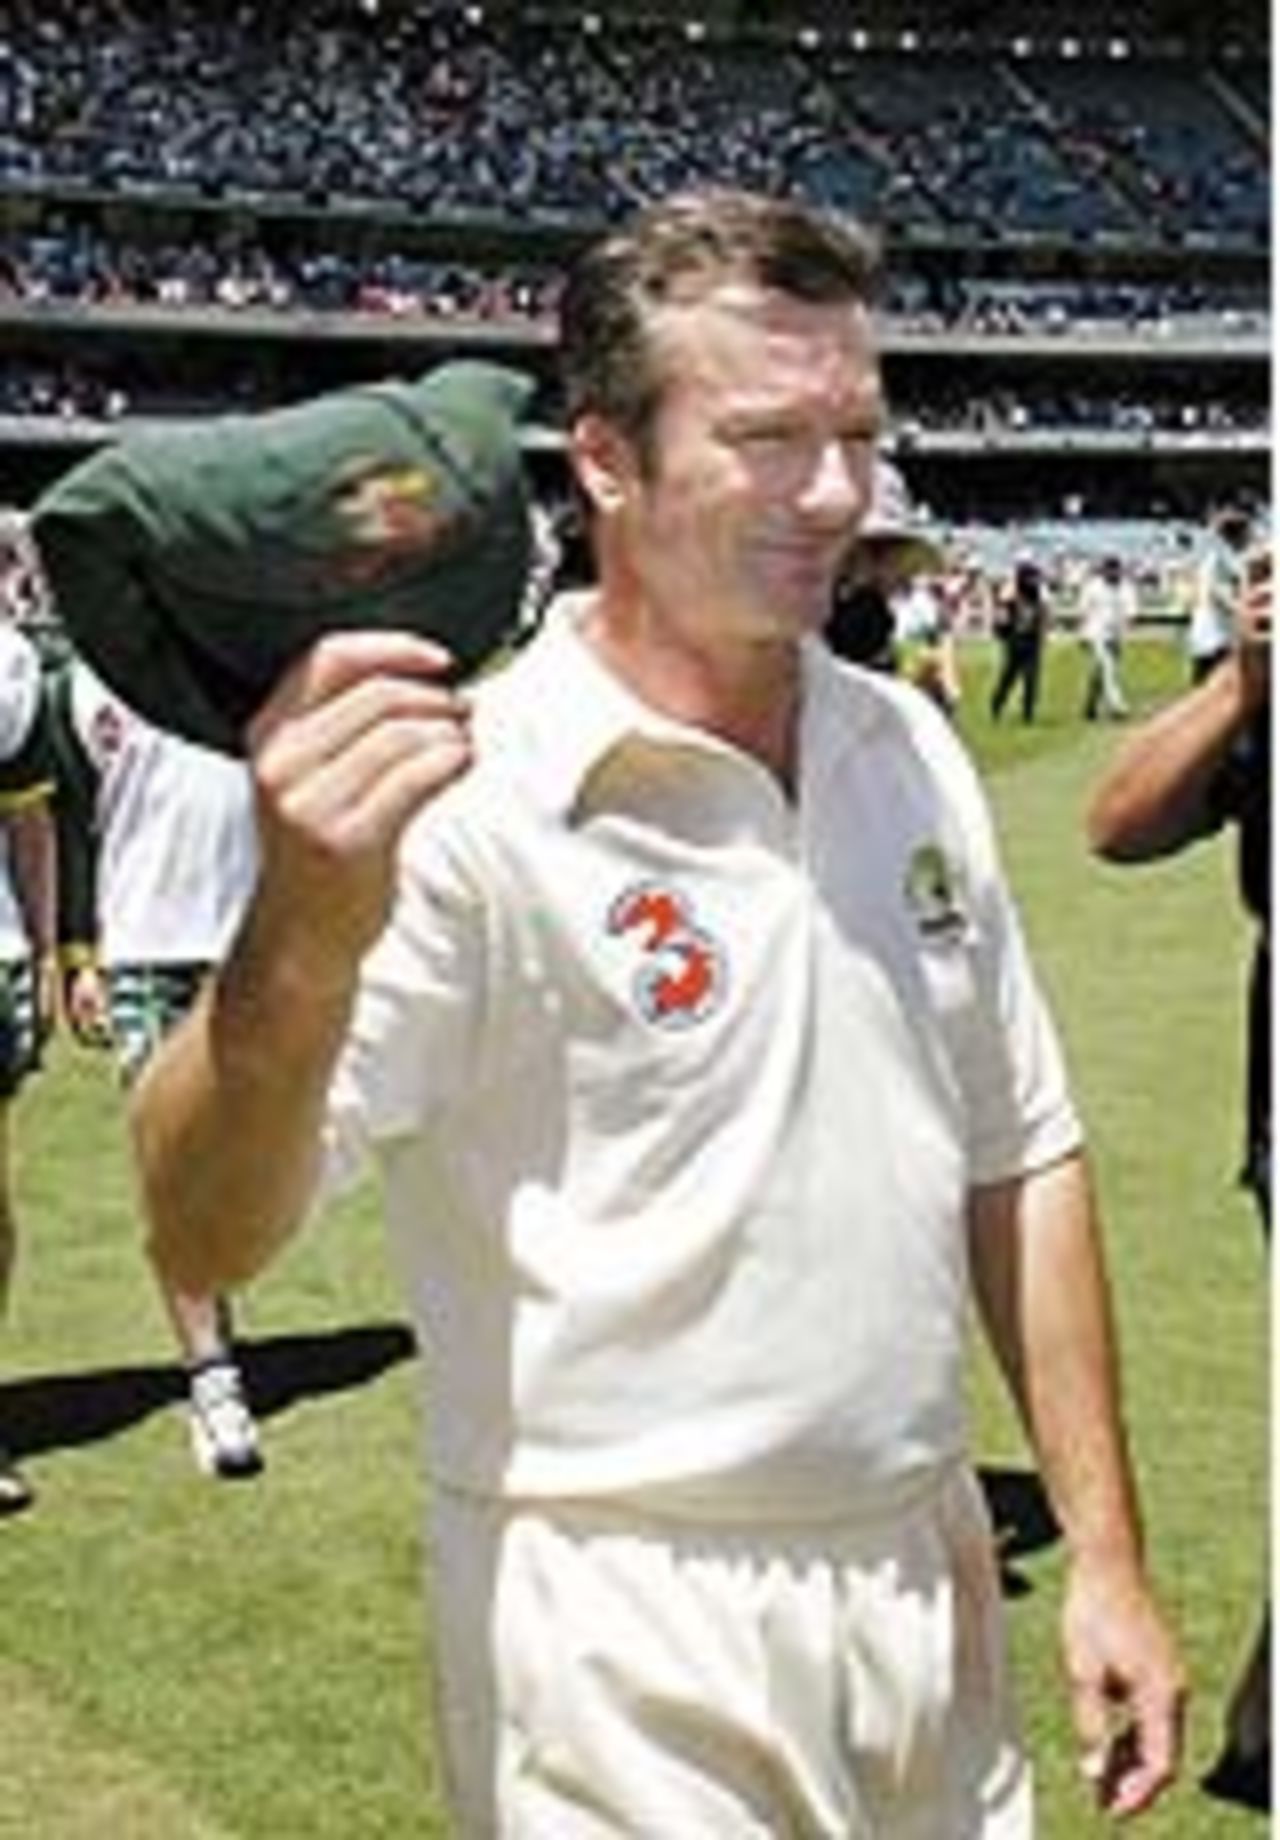 Steve Waugh waves farewell to the Melbourne crowd, Australia v India, 3rd Test, Melbourne, 5th day